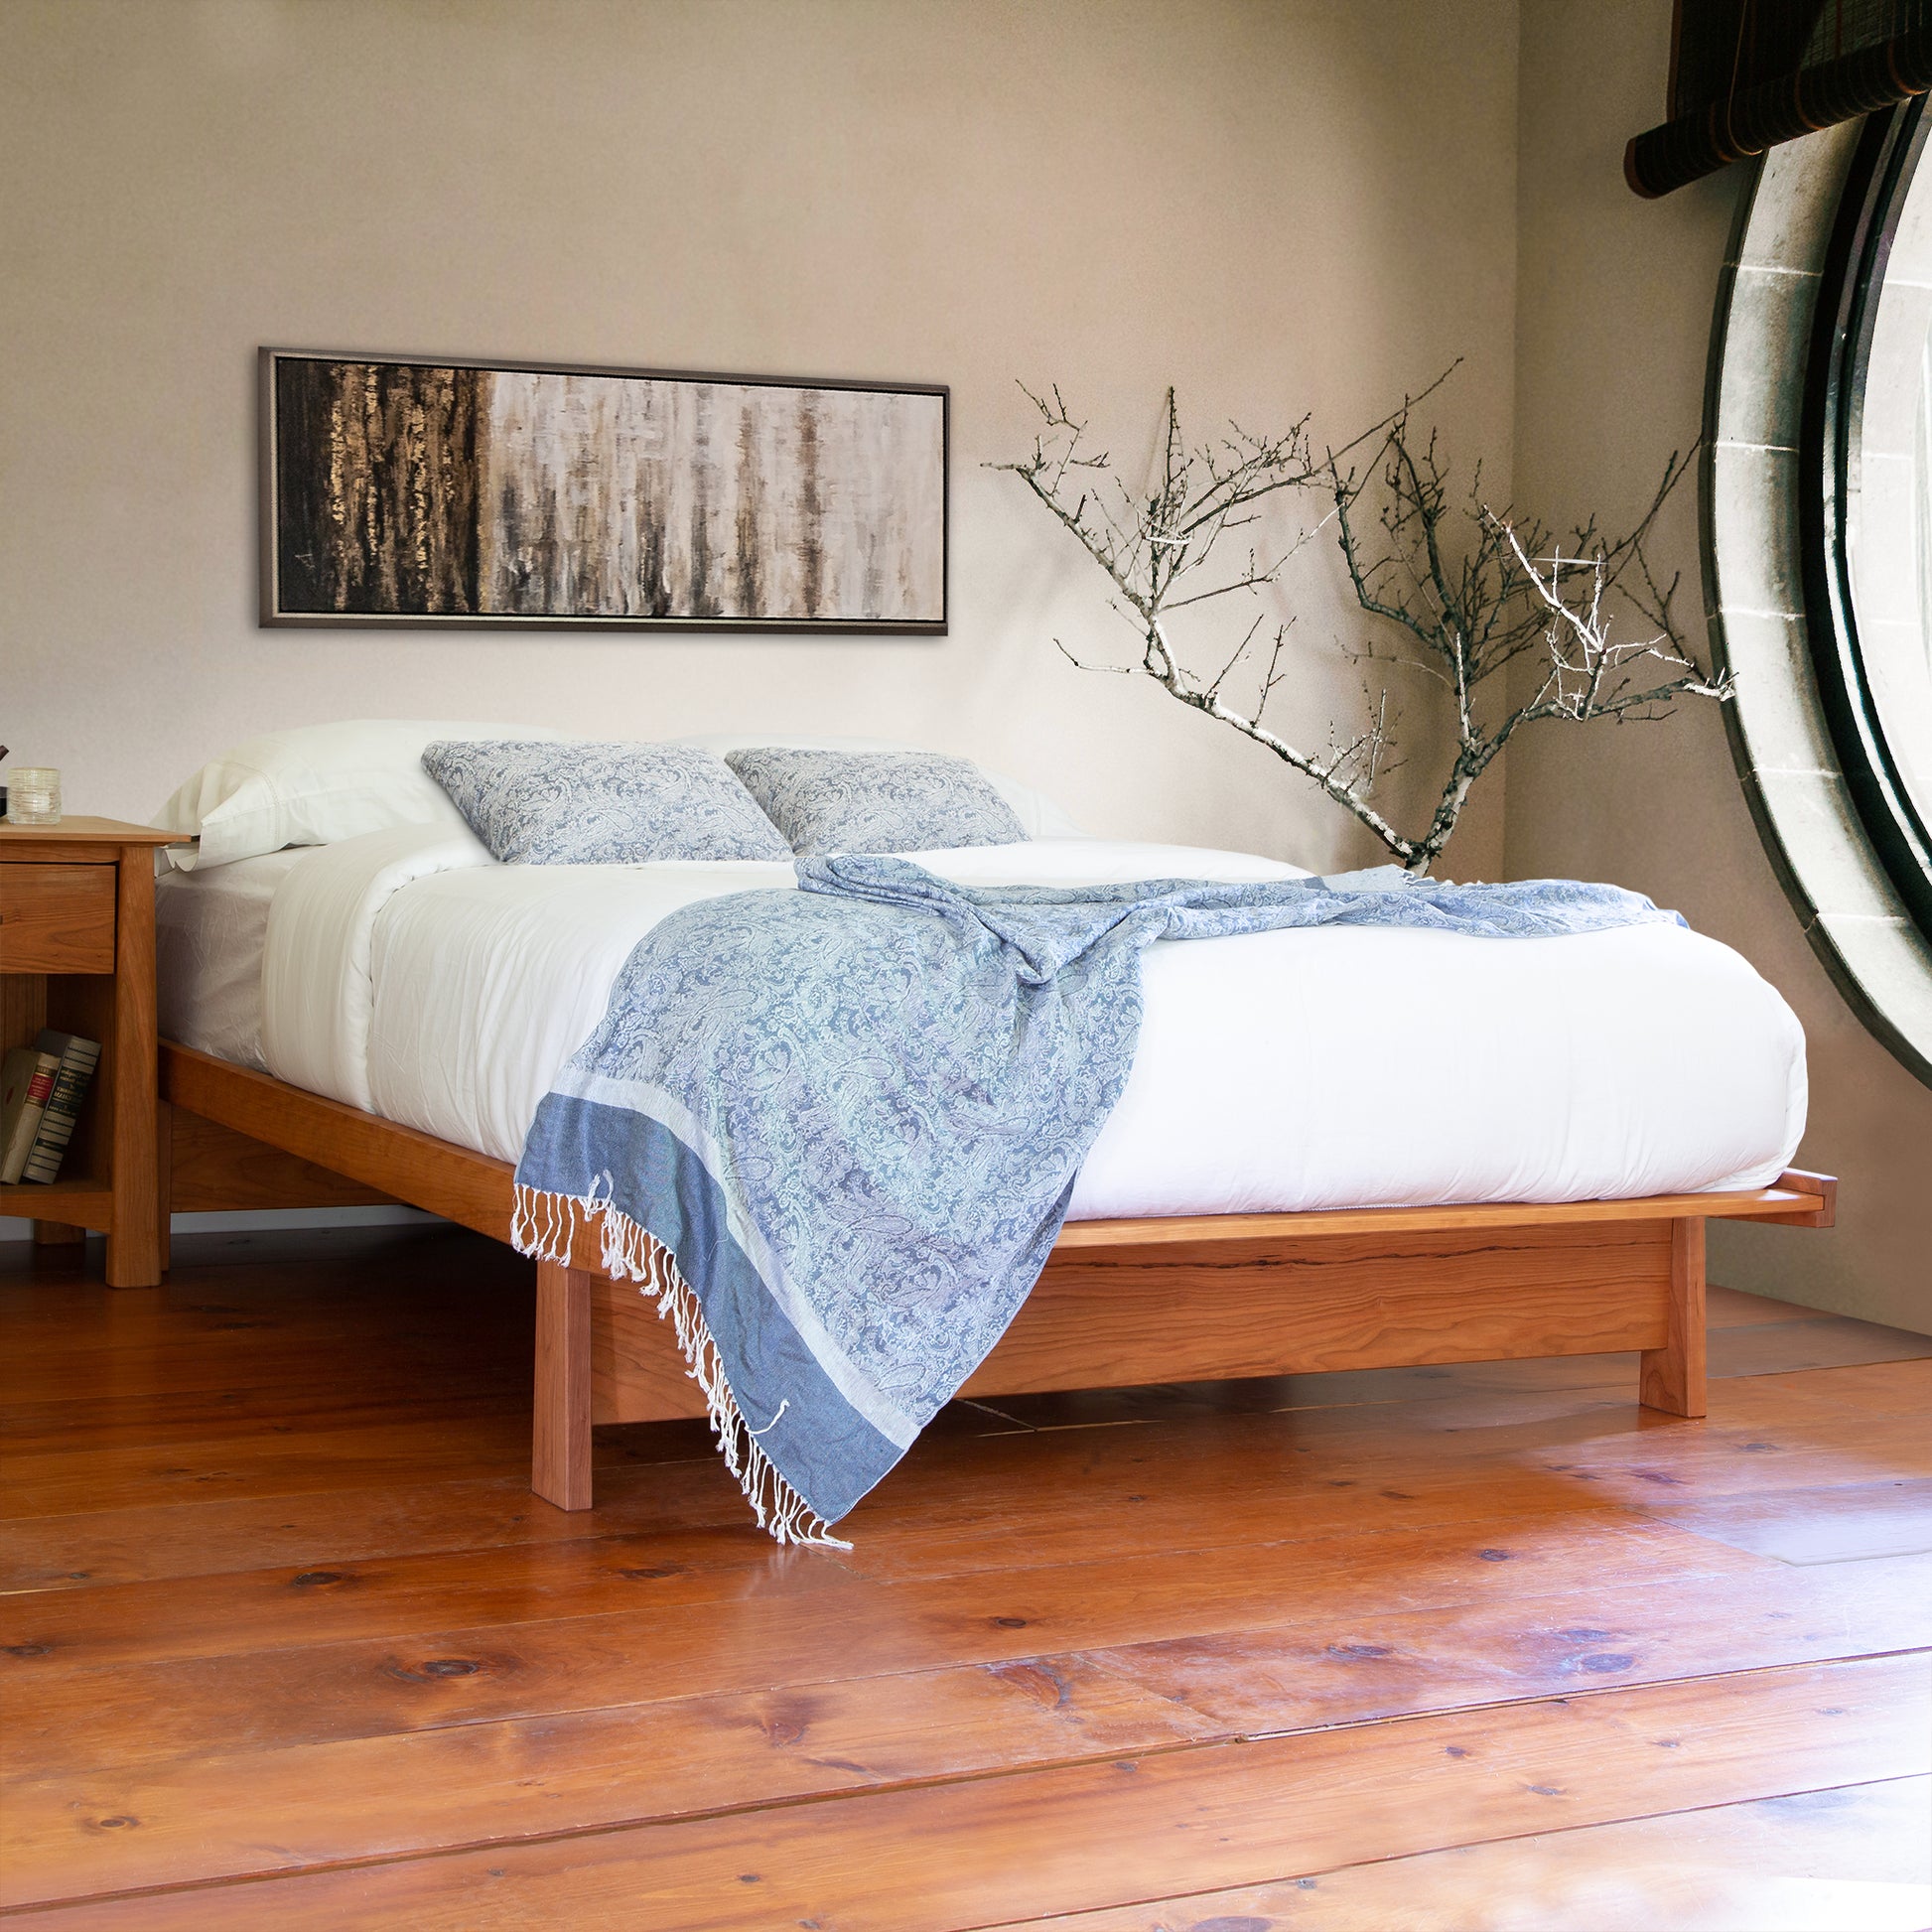 Cherry Moon Dovetail Platform Bed in a stylish bedroom featuring white bedding, blue patterned pillows, nightstand with books, and abstract wall art. Sustainable cherry wood furniture on wooden flooring. Perfect example of American made maple and cherry wood furniture by Maple Corner Woodworks.